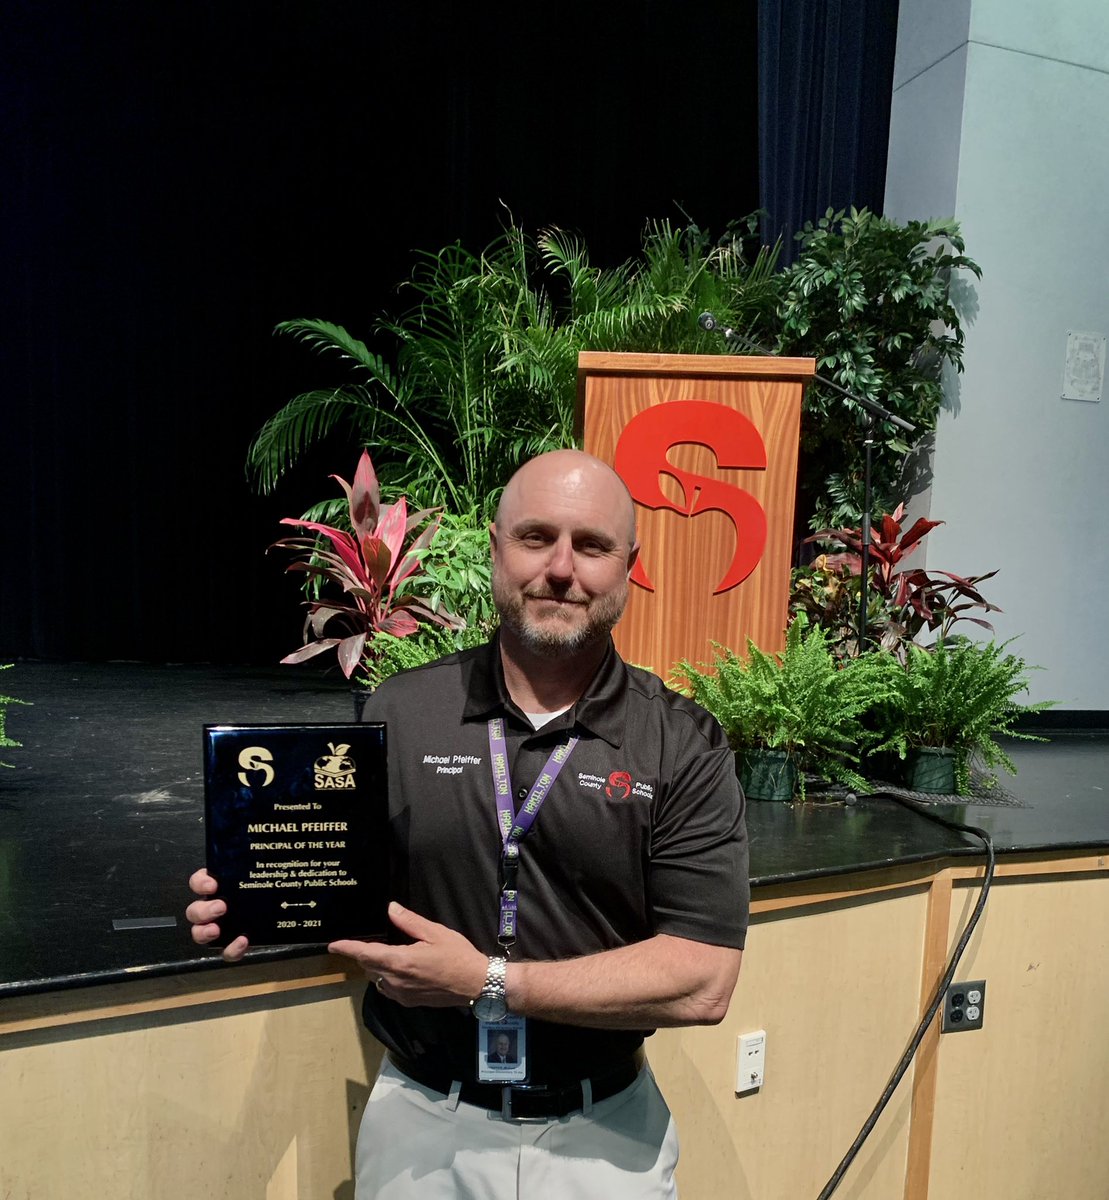 Congratulations to Hamilton’s principal, Mr. Pfeiffer, for being named SCPS Principal of the Year for his leadership and dedication to Seminole County Schools and to the students, staff, and families of Hamilton Elementary! 
💜💚#hamiltonhero  #welldeserved  #principaloftheyear